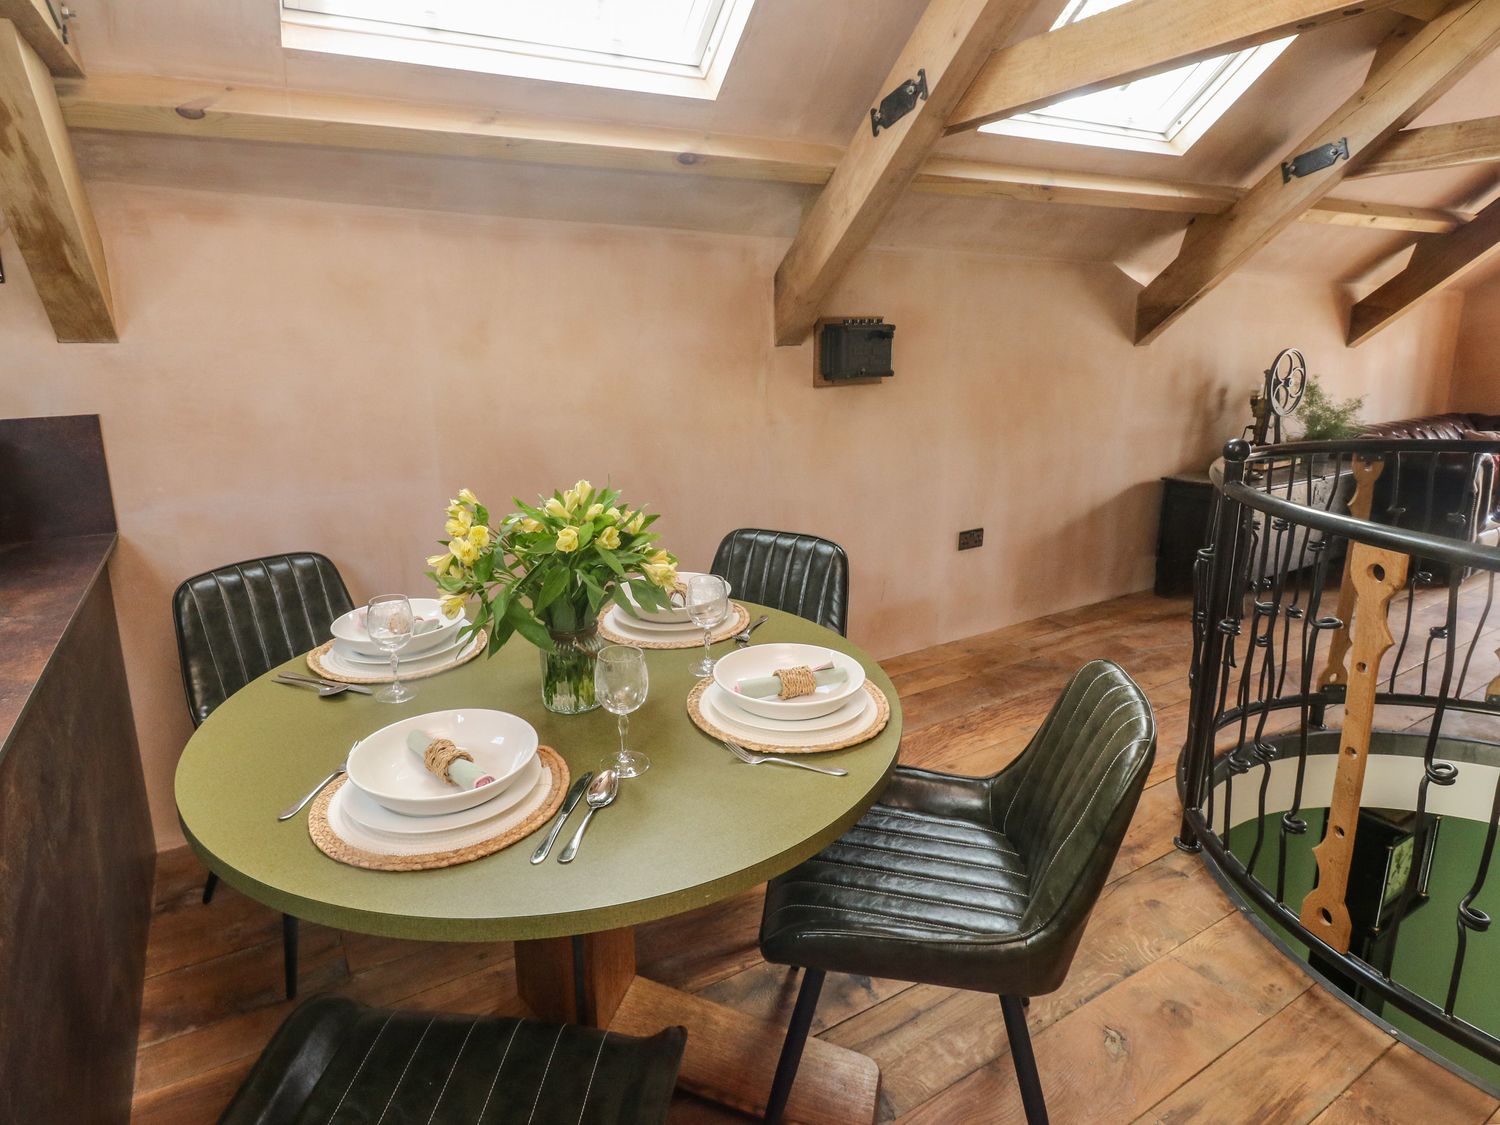 Becket's Barn in Northlew in Devon. Two-bed barn conversion with original features & private balcony